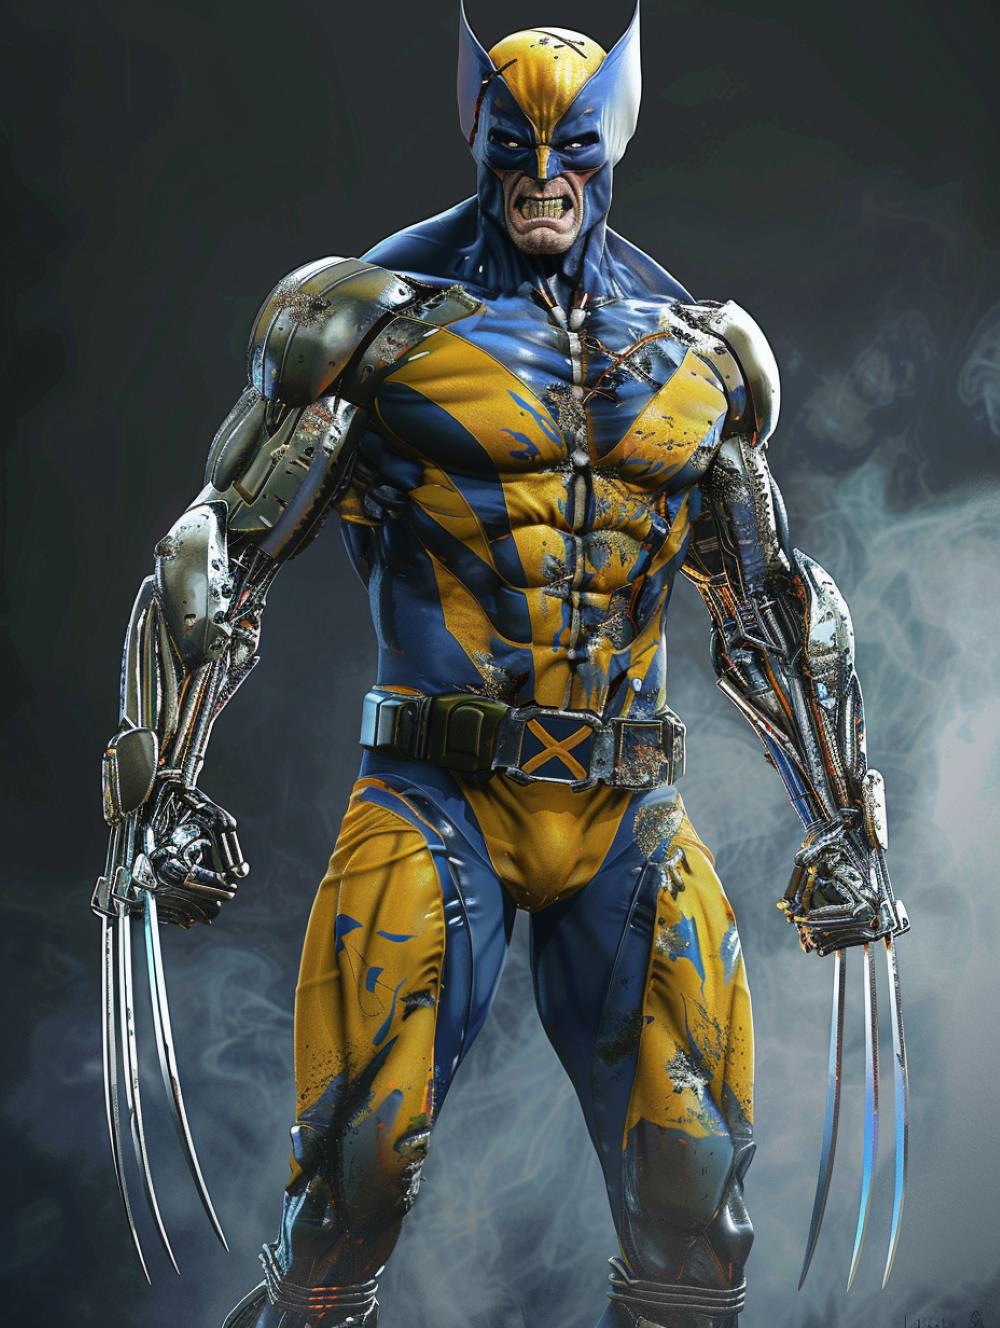 Wolverine with Vibranium infused his body